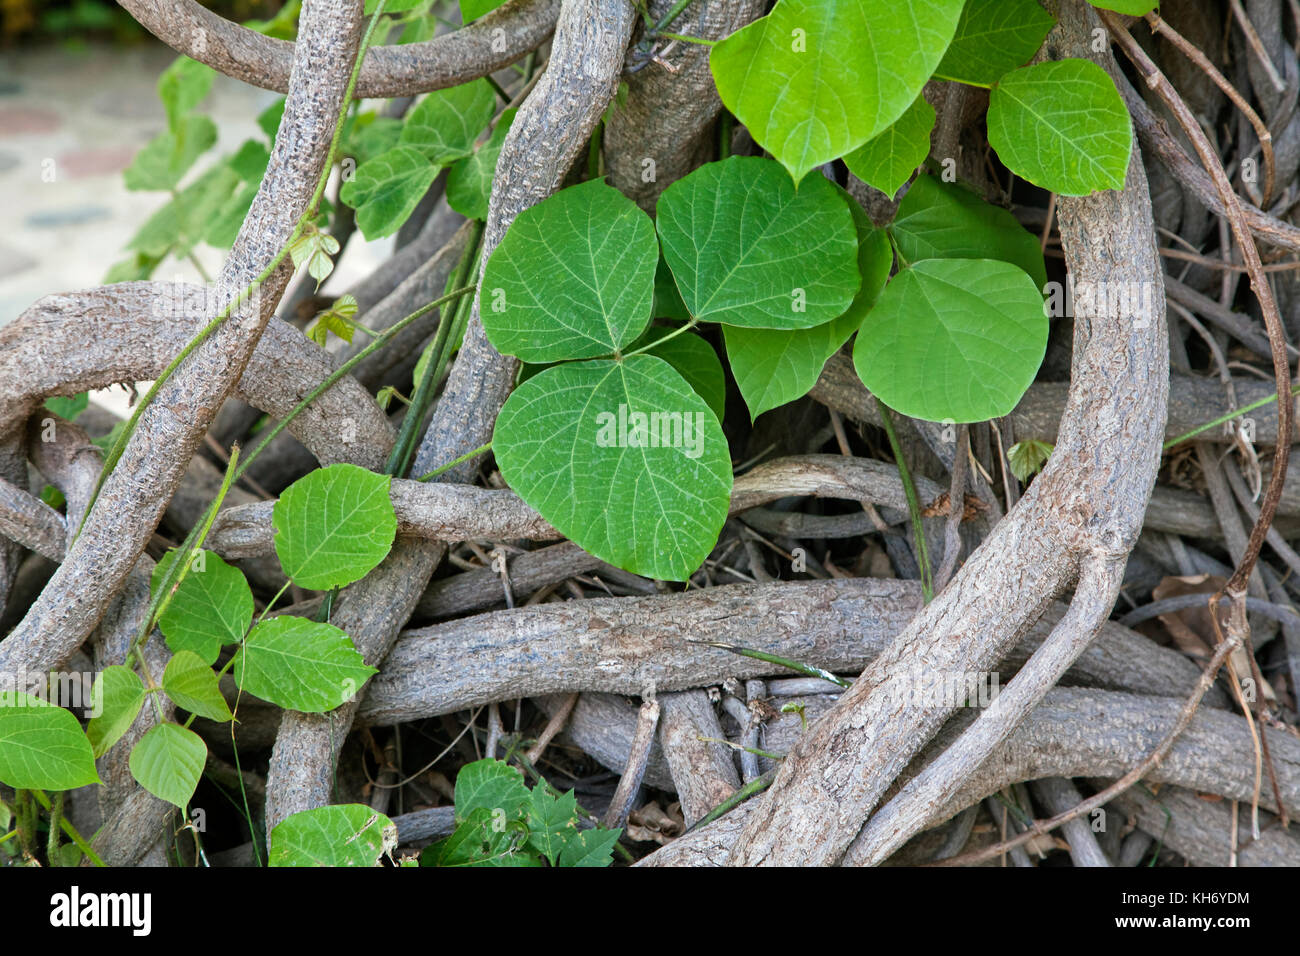 Interlaced stems of a creeper plant Stock Photo